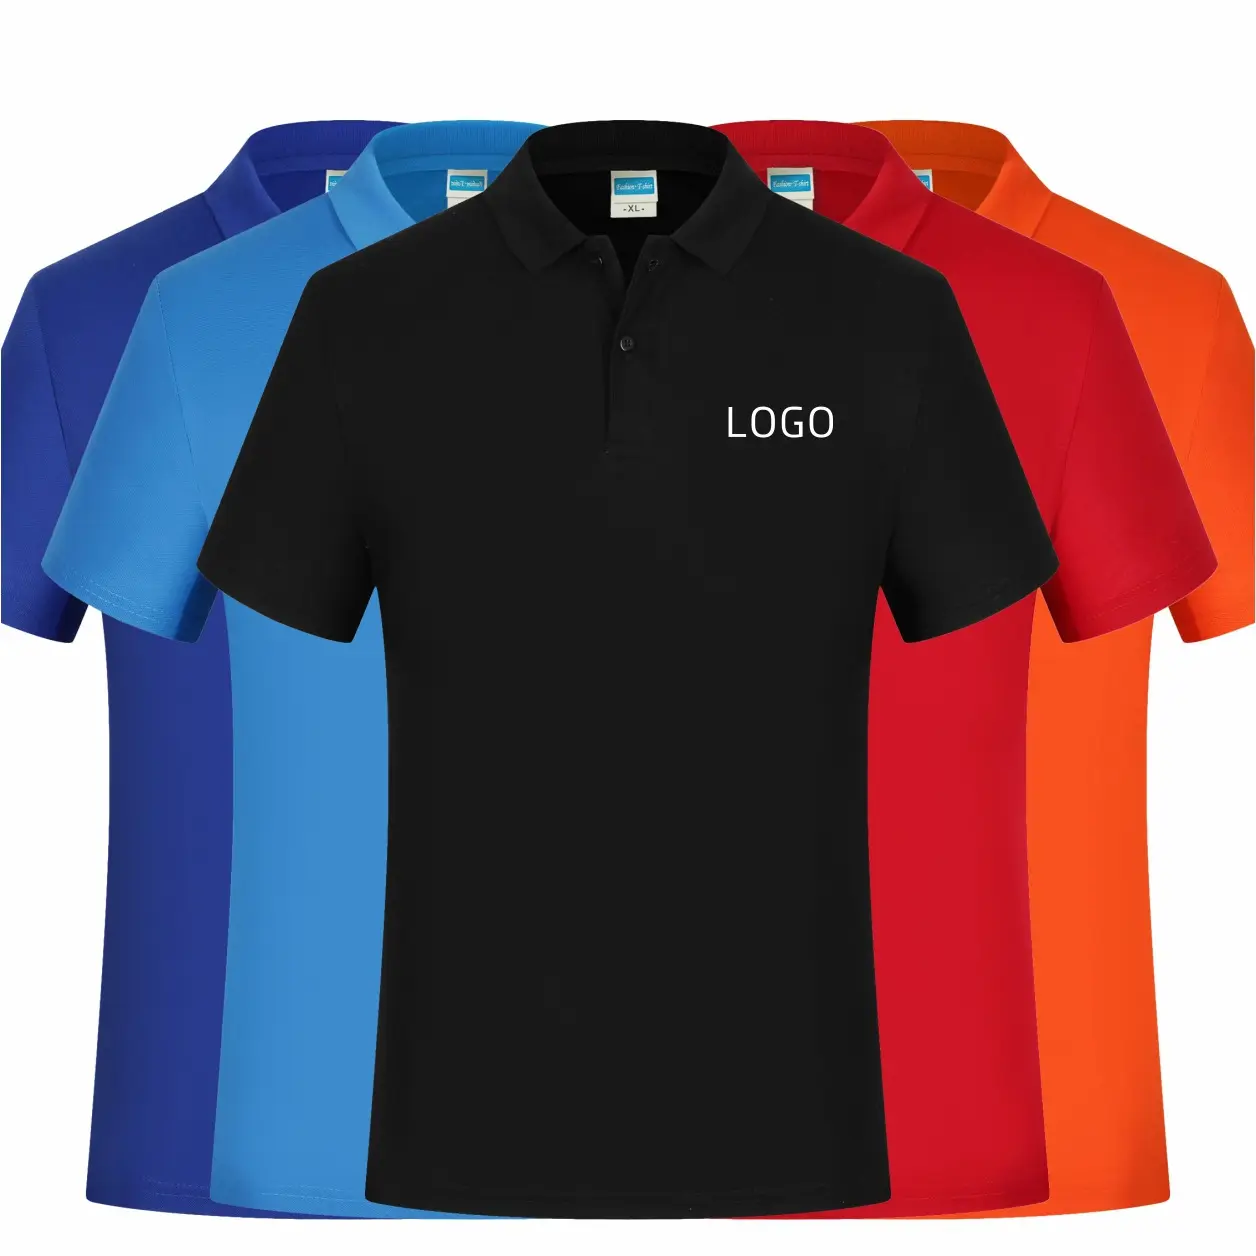 MT-24 Customized 100% cotton Polo shirt with logo printed or embroidery customized advertising T-shirt